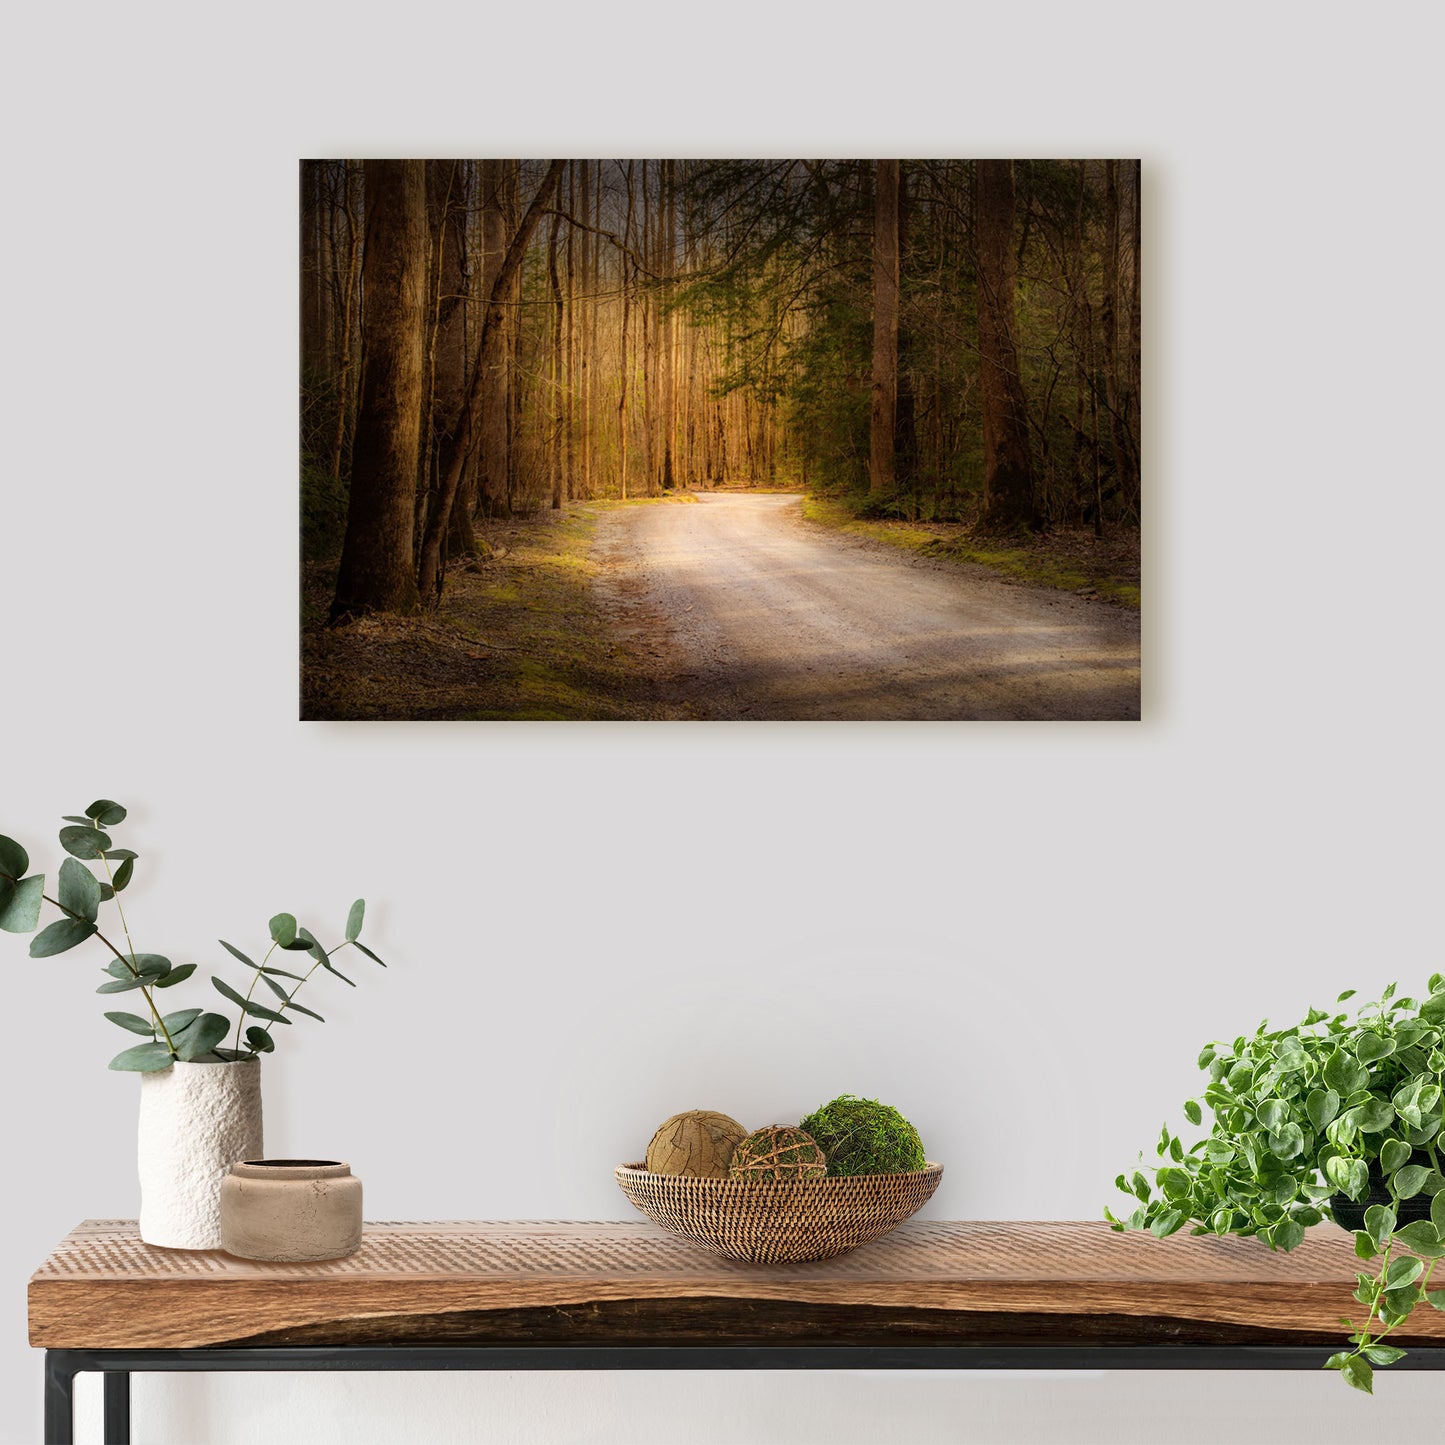 Canvas wall art print featuring Roaring Fork Nature Trail in the Great Smoky Mountains National Park